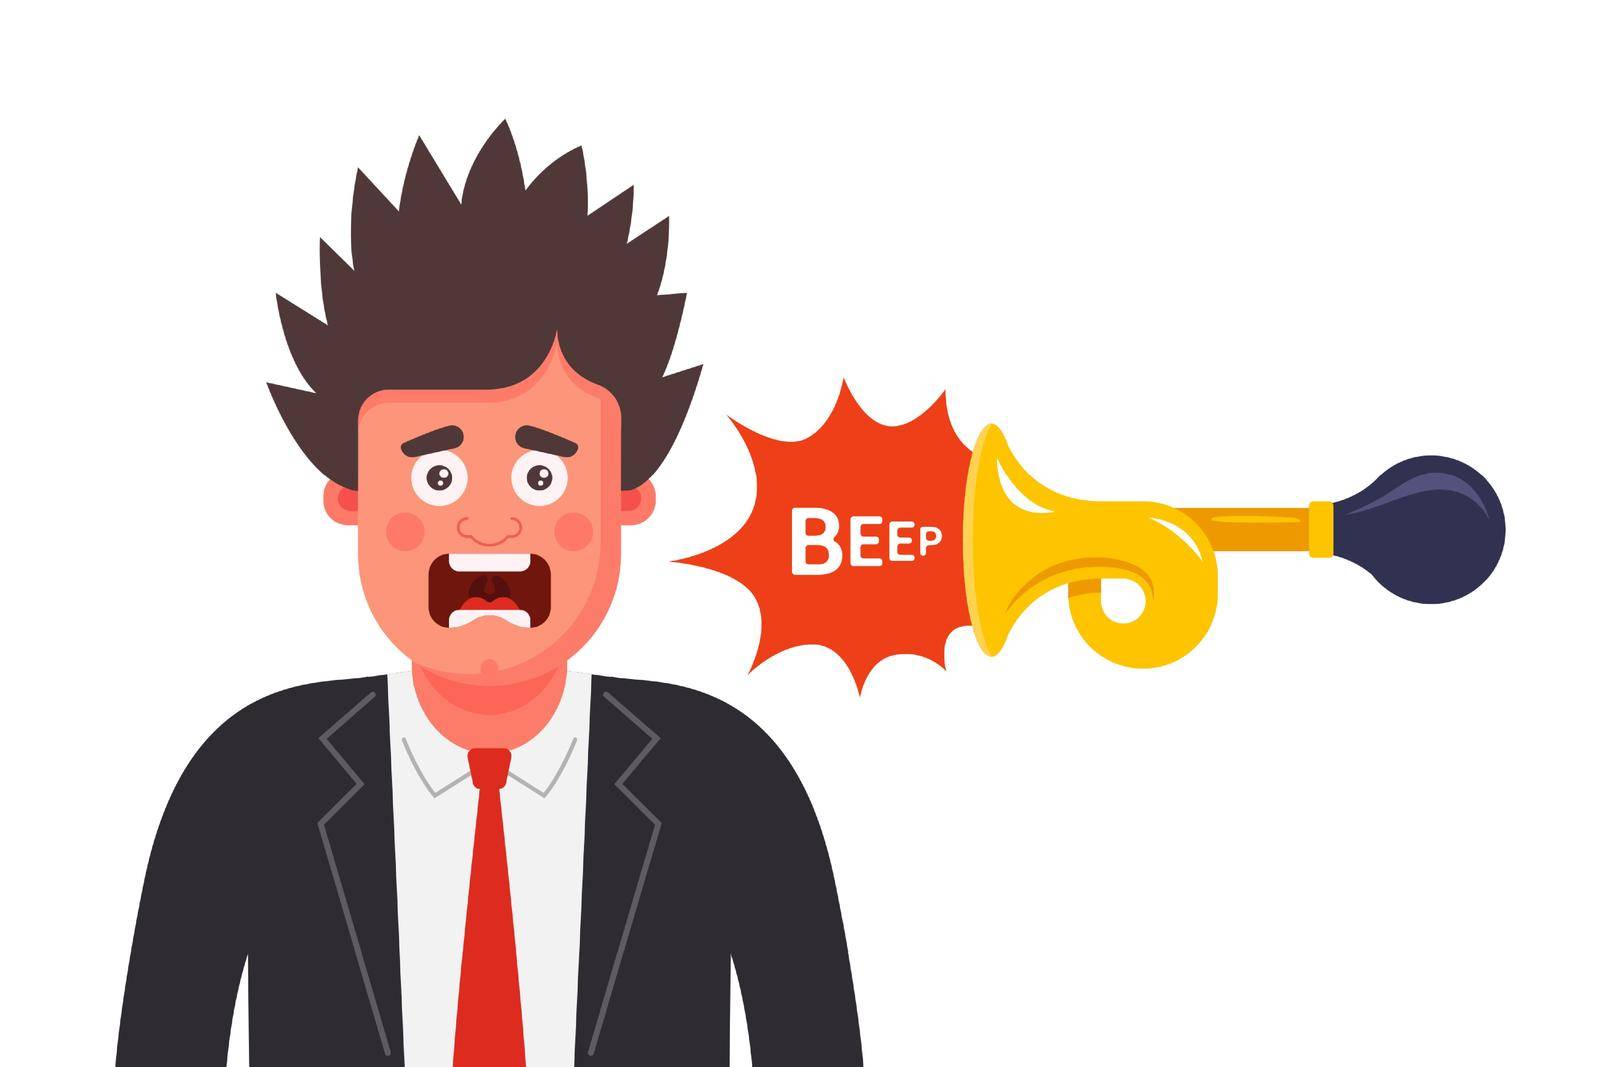 the man was frightened by the unexpected sound. scare a person with a loud beep. flat vector character illustration.